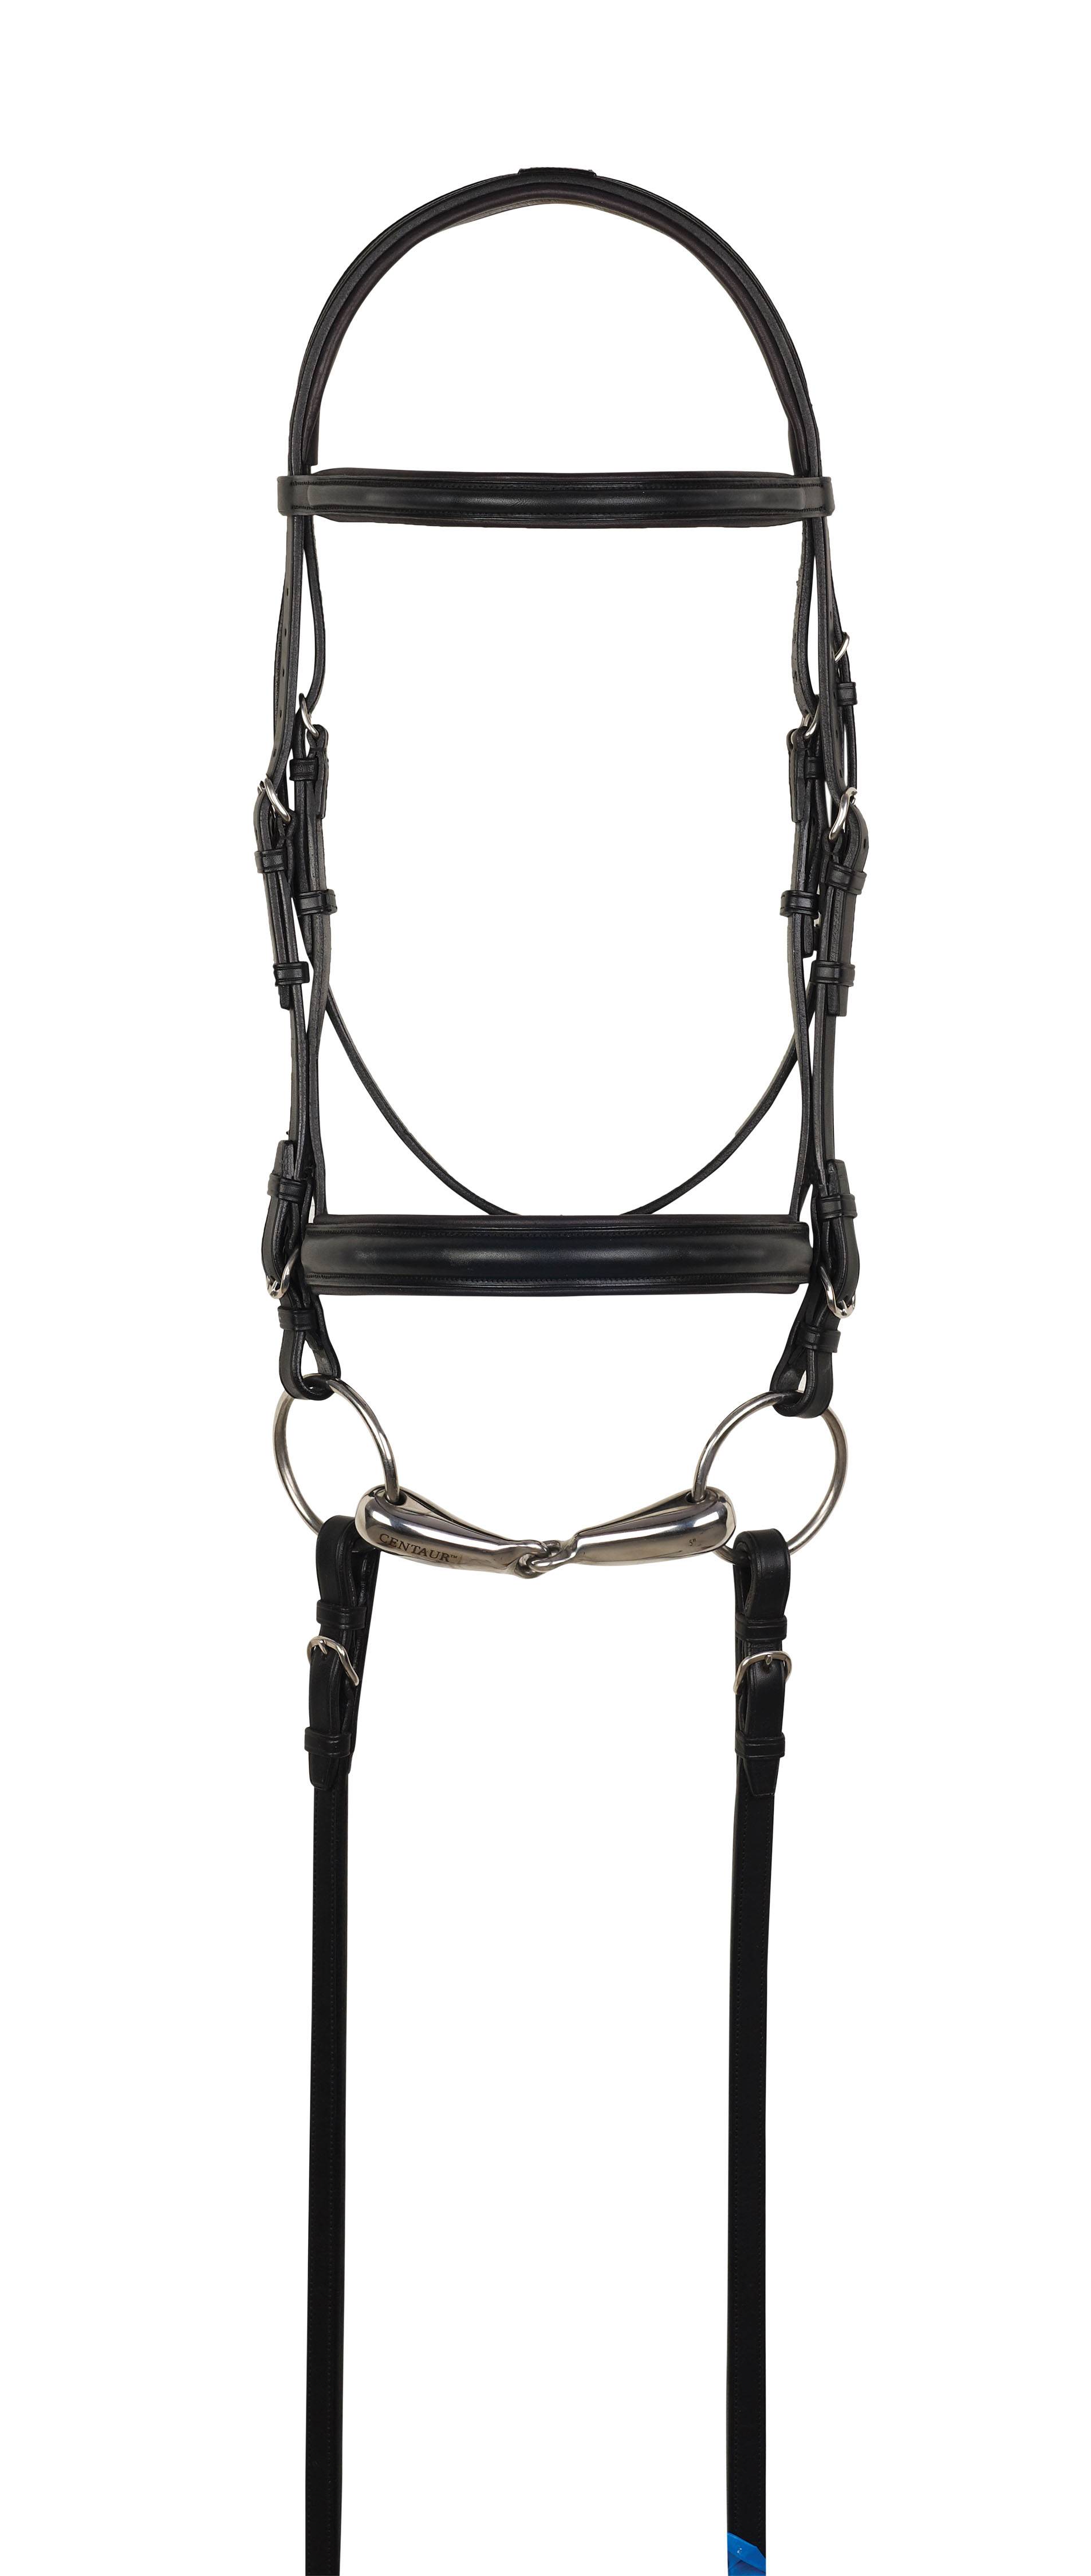 Aramas Plain Raised Padded 1 Wide Nose Dressage Bridle with Leather Reins